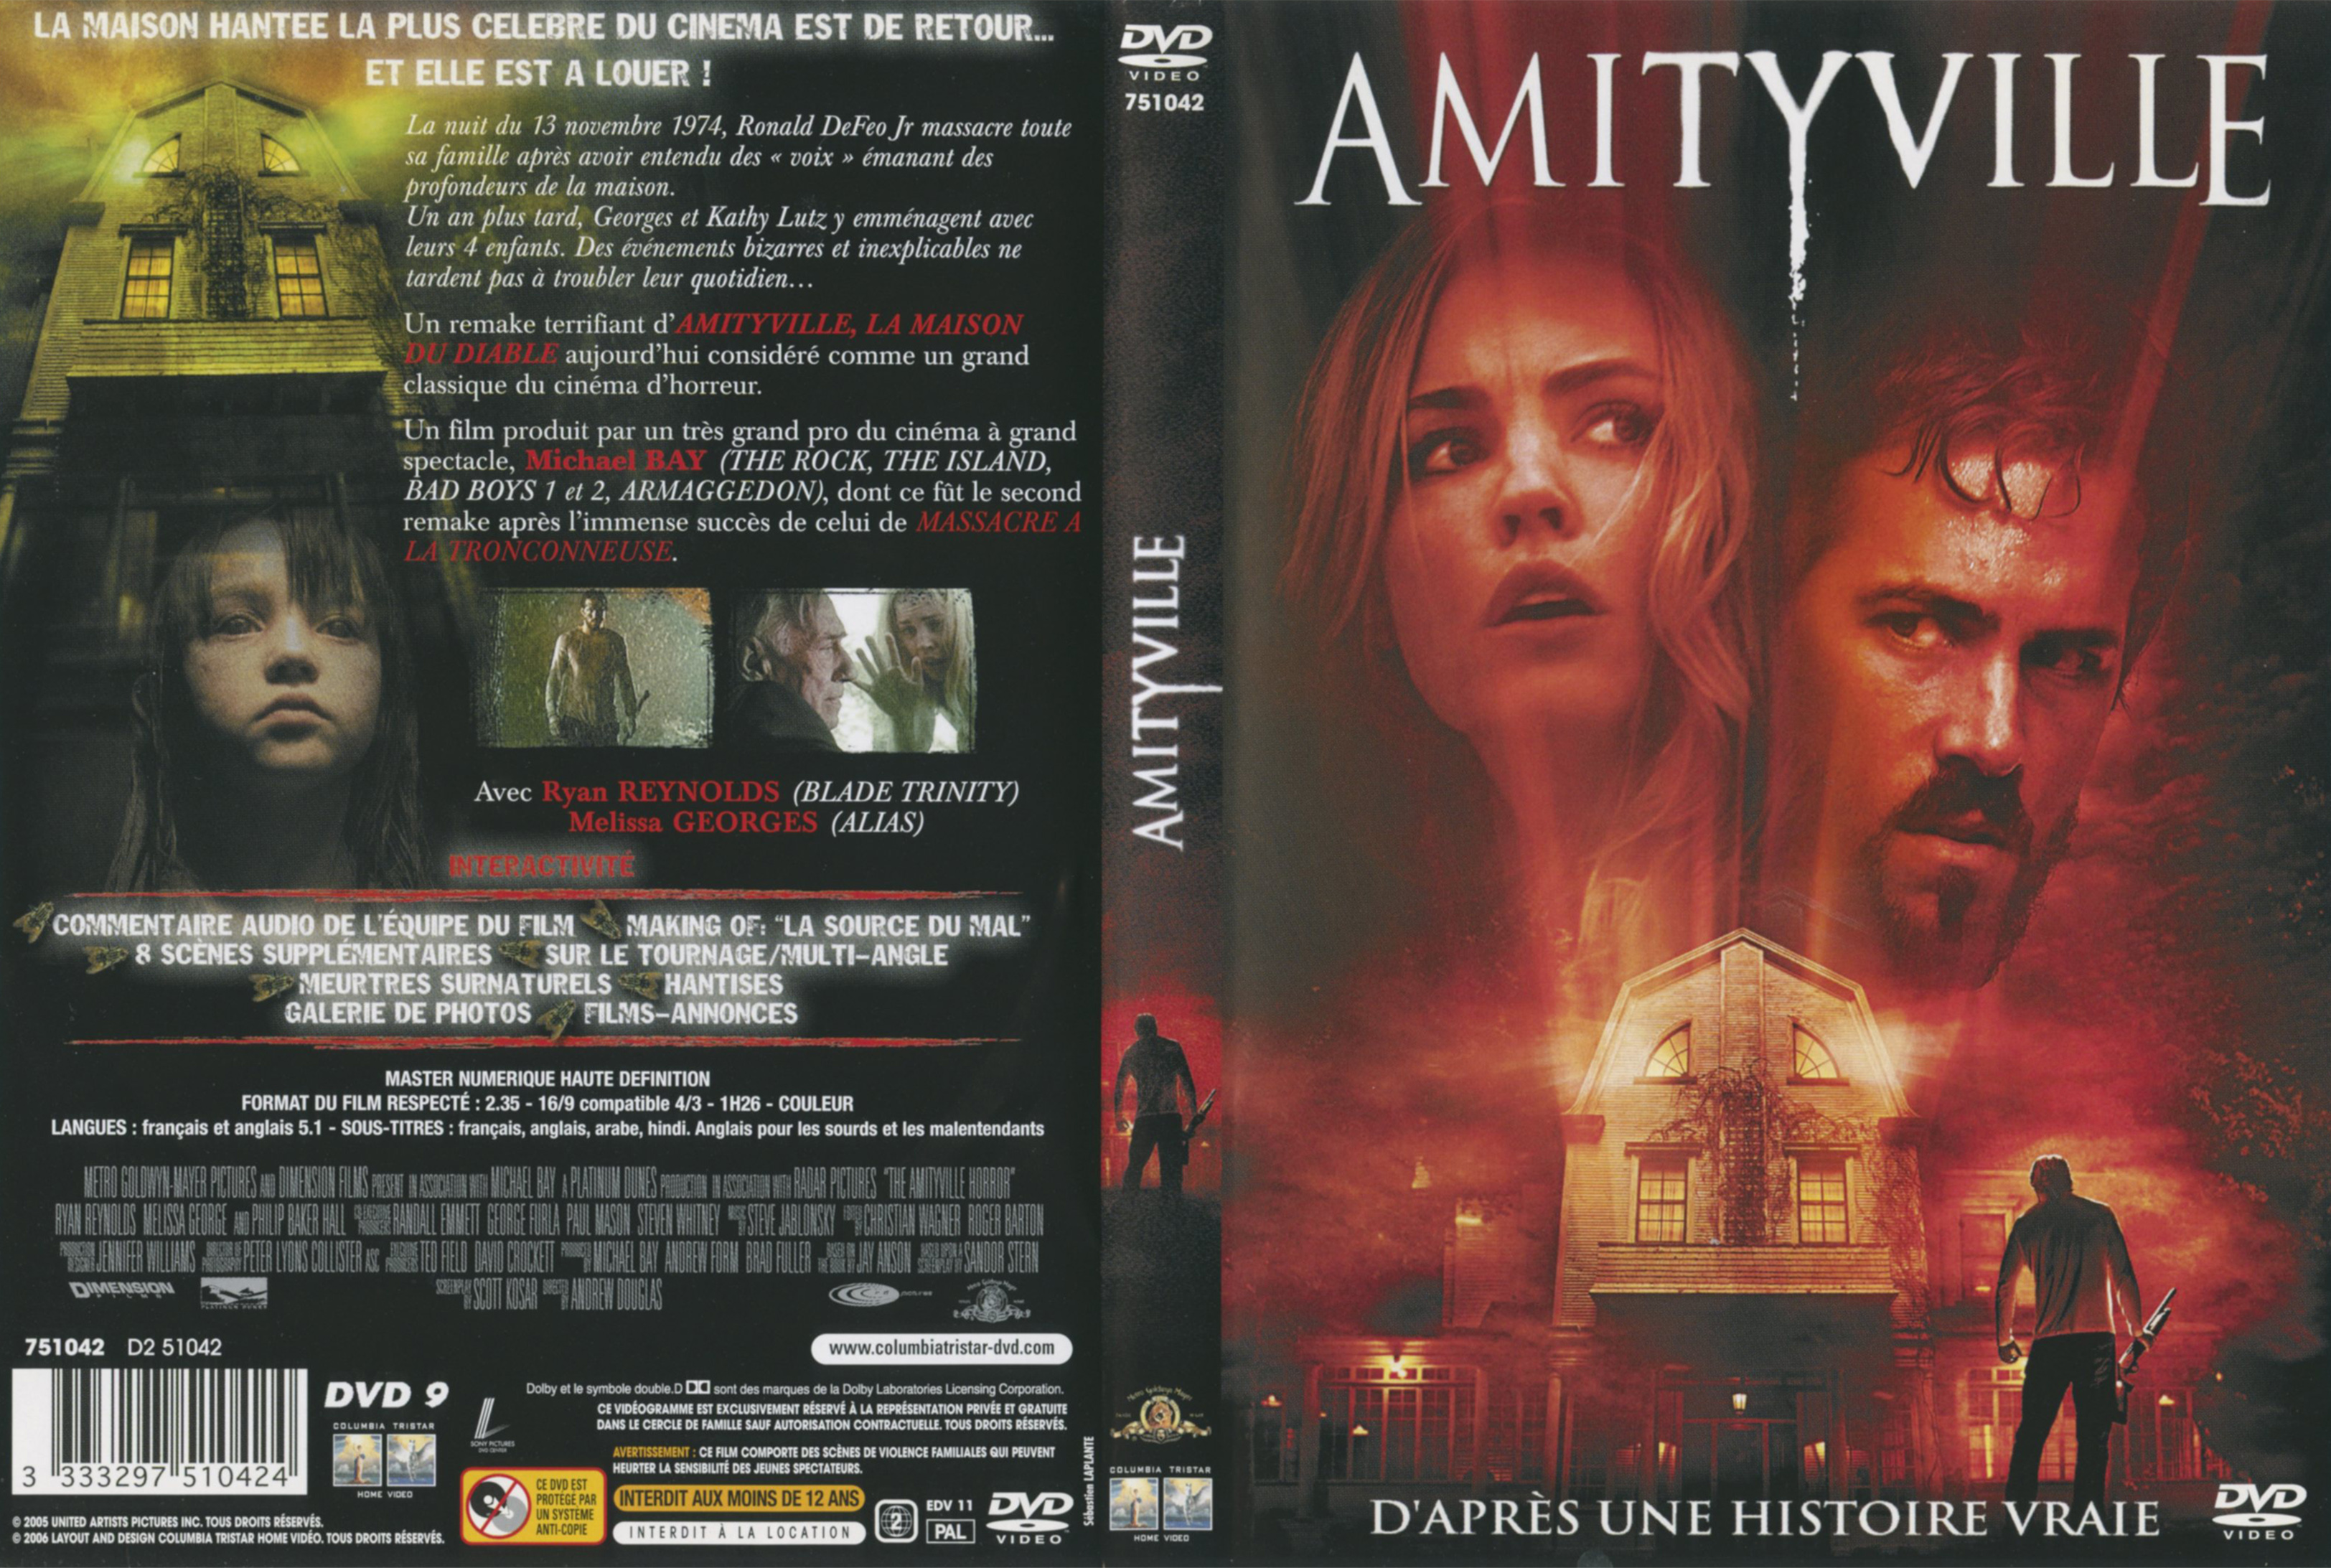 Jaquette DVD Amityville (2005) v2